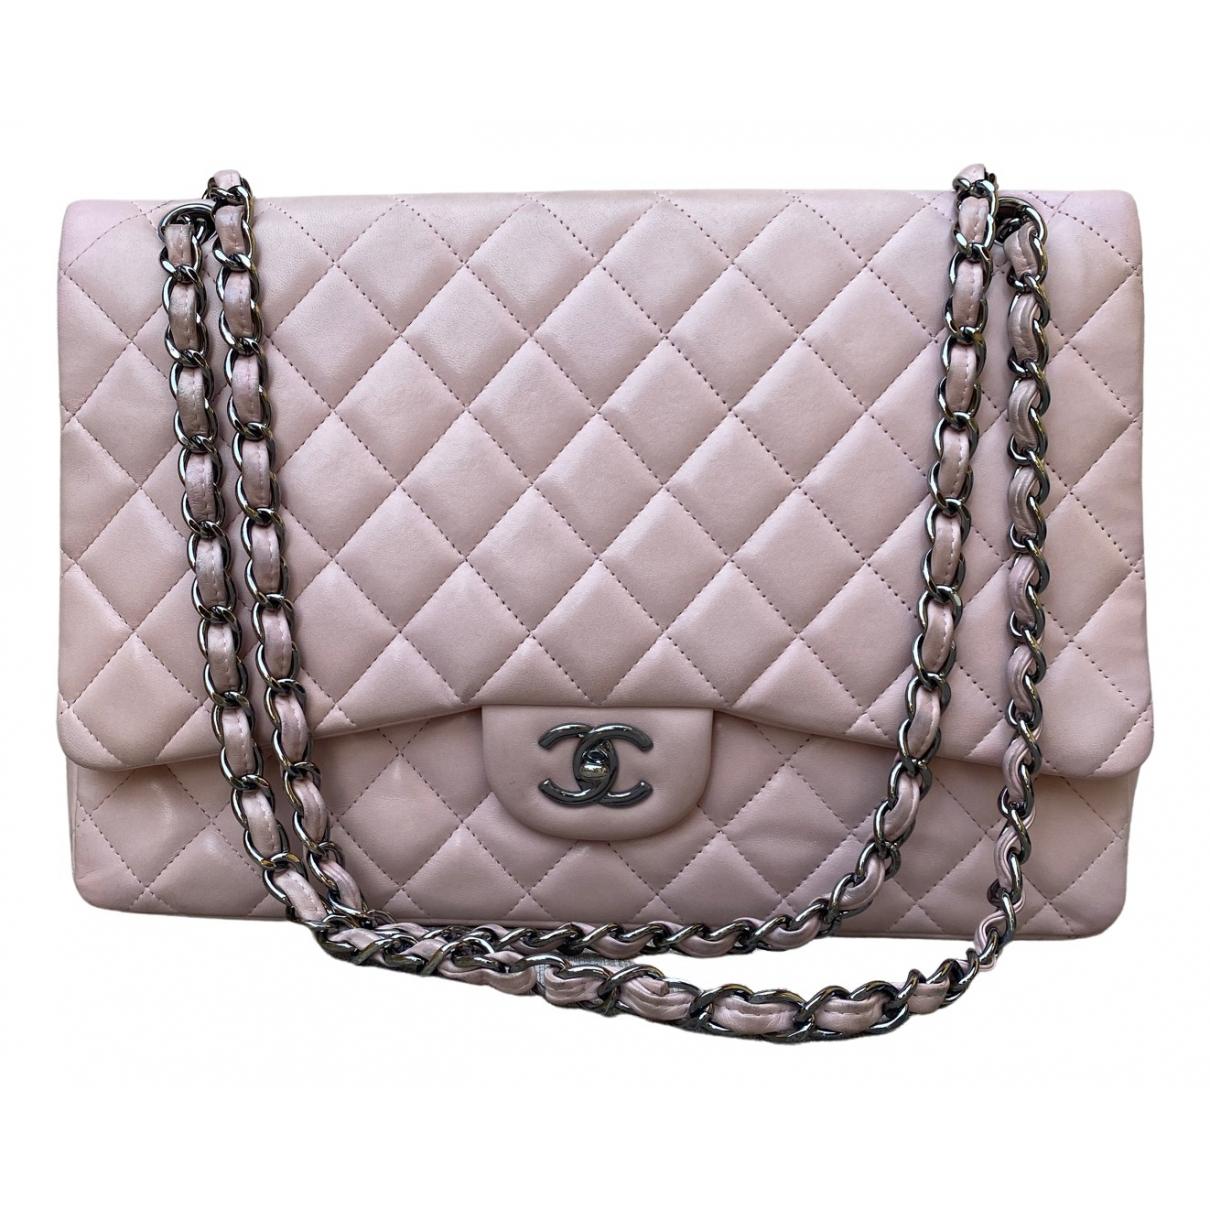 Timeless/classique leather crossbody bag Chanel Pink in Leather - 25262031